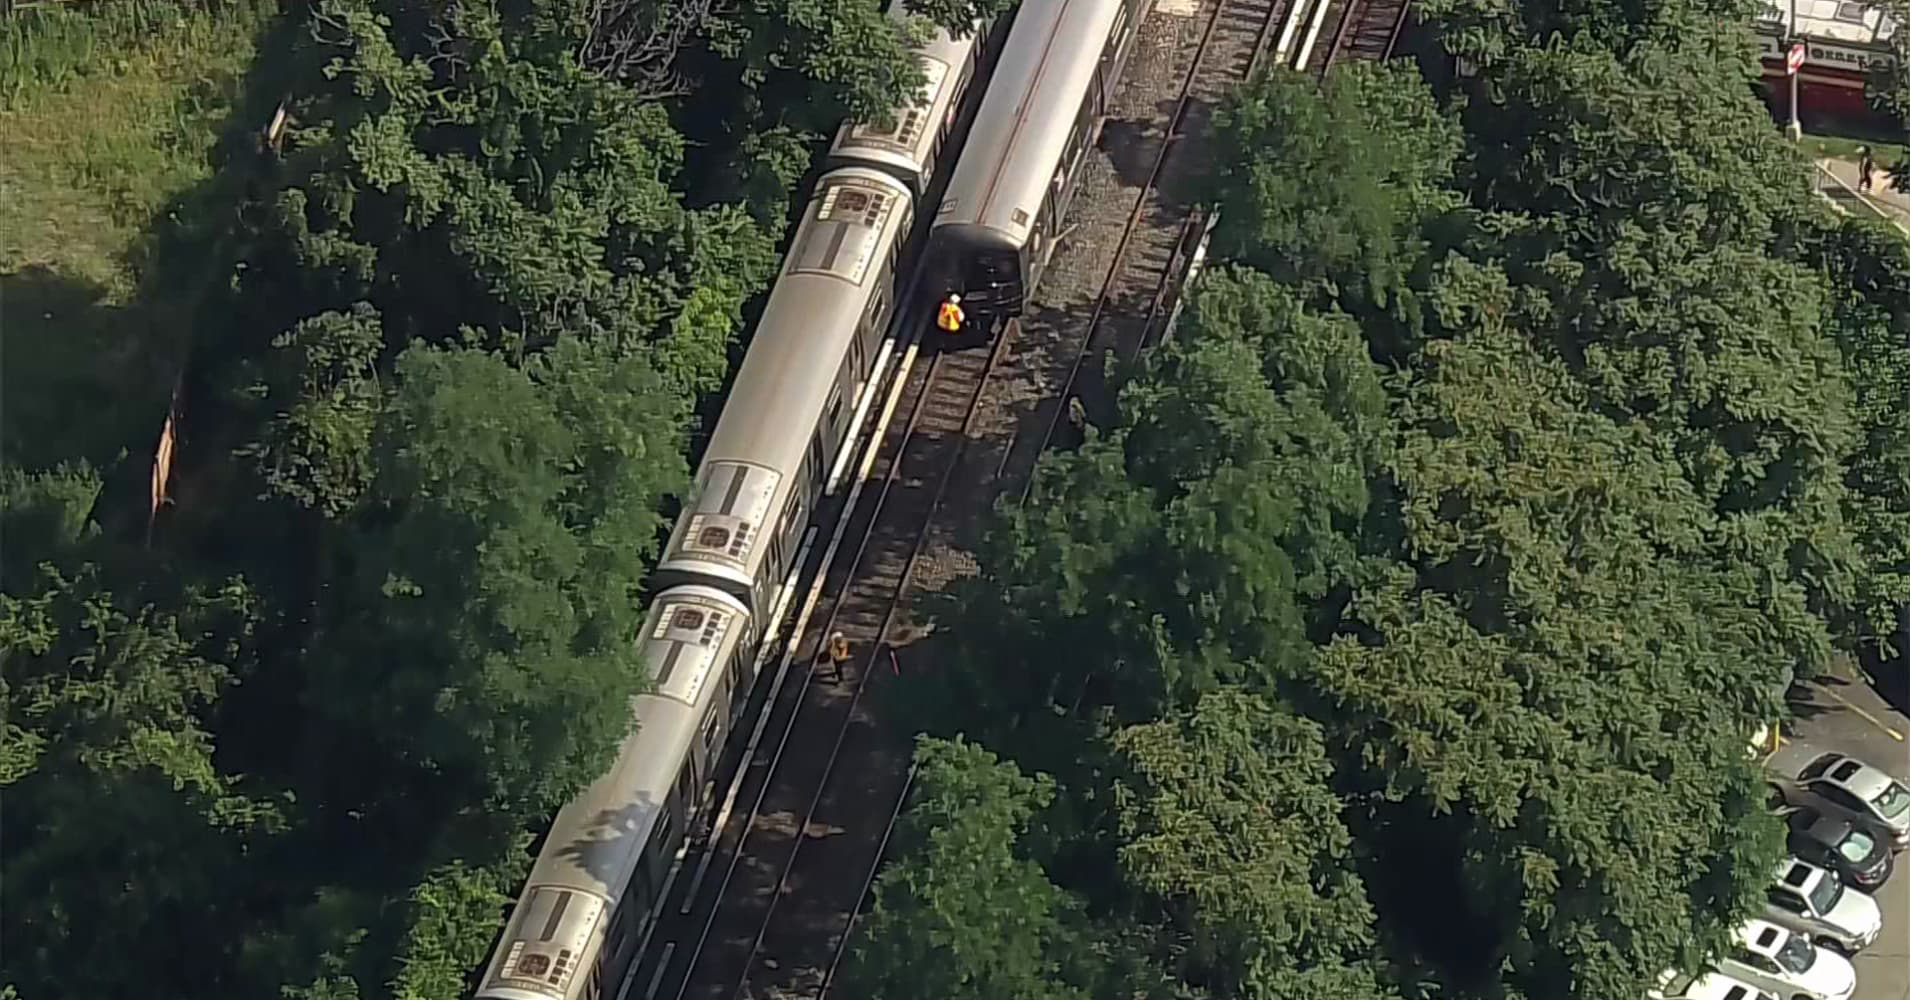 Subway train derails in Brooklyn in the latest mishap of NYC's 'summer of hell'